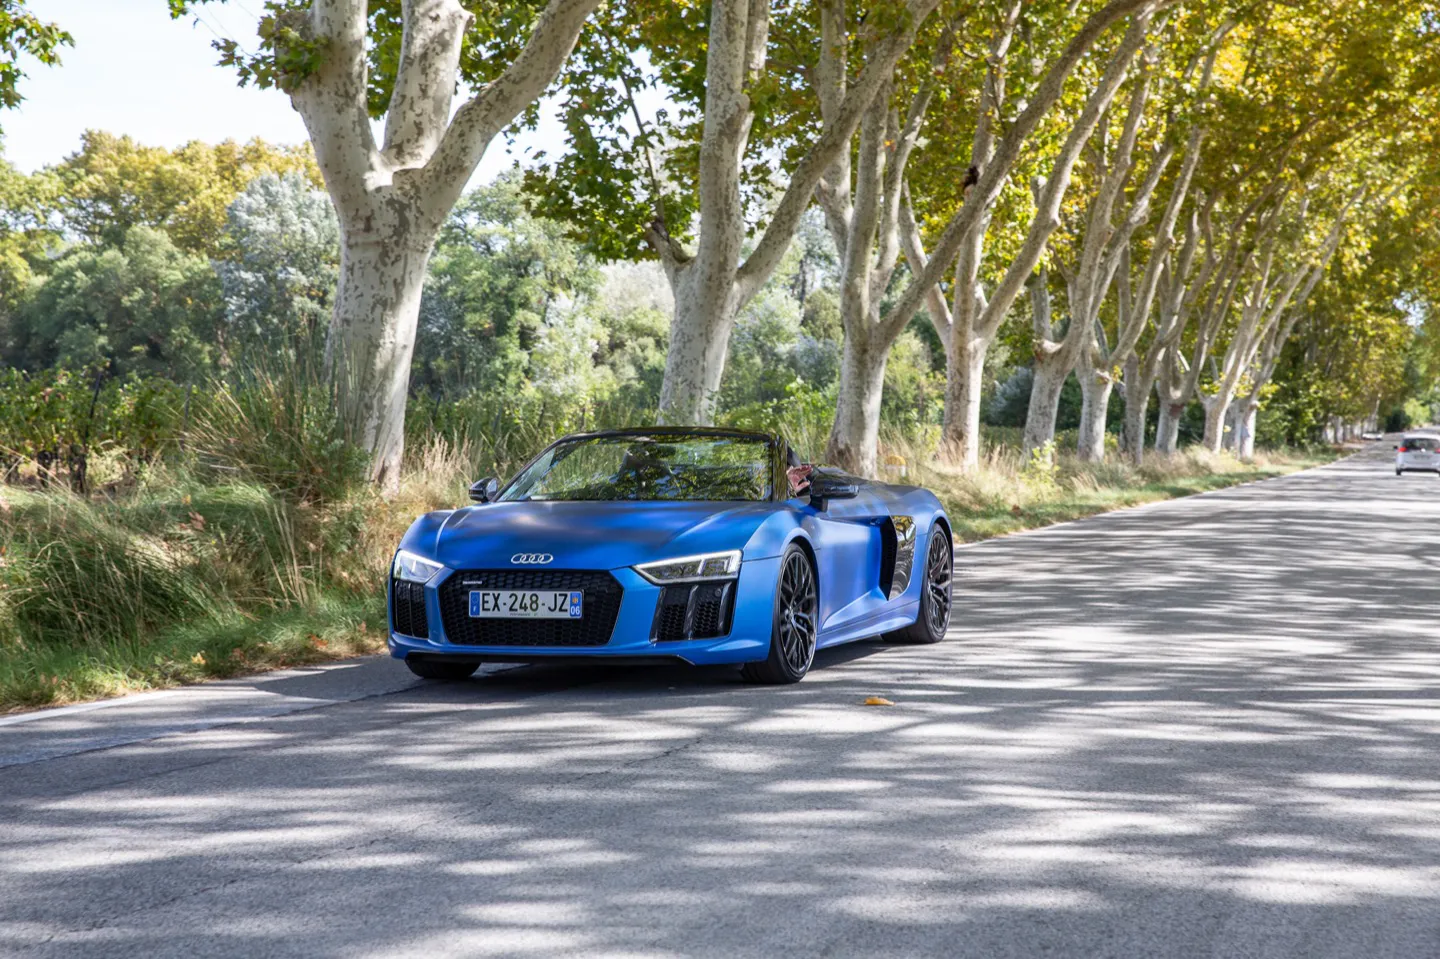 Drive your favourite supercar on the best roads around Budapest